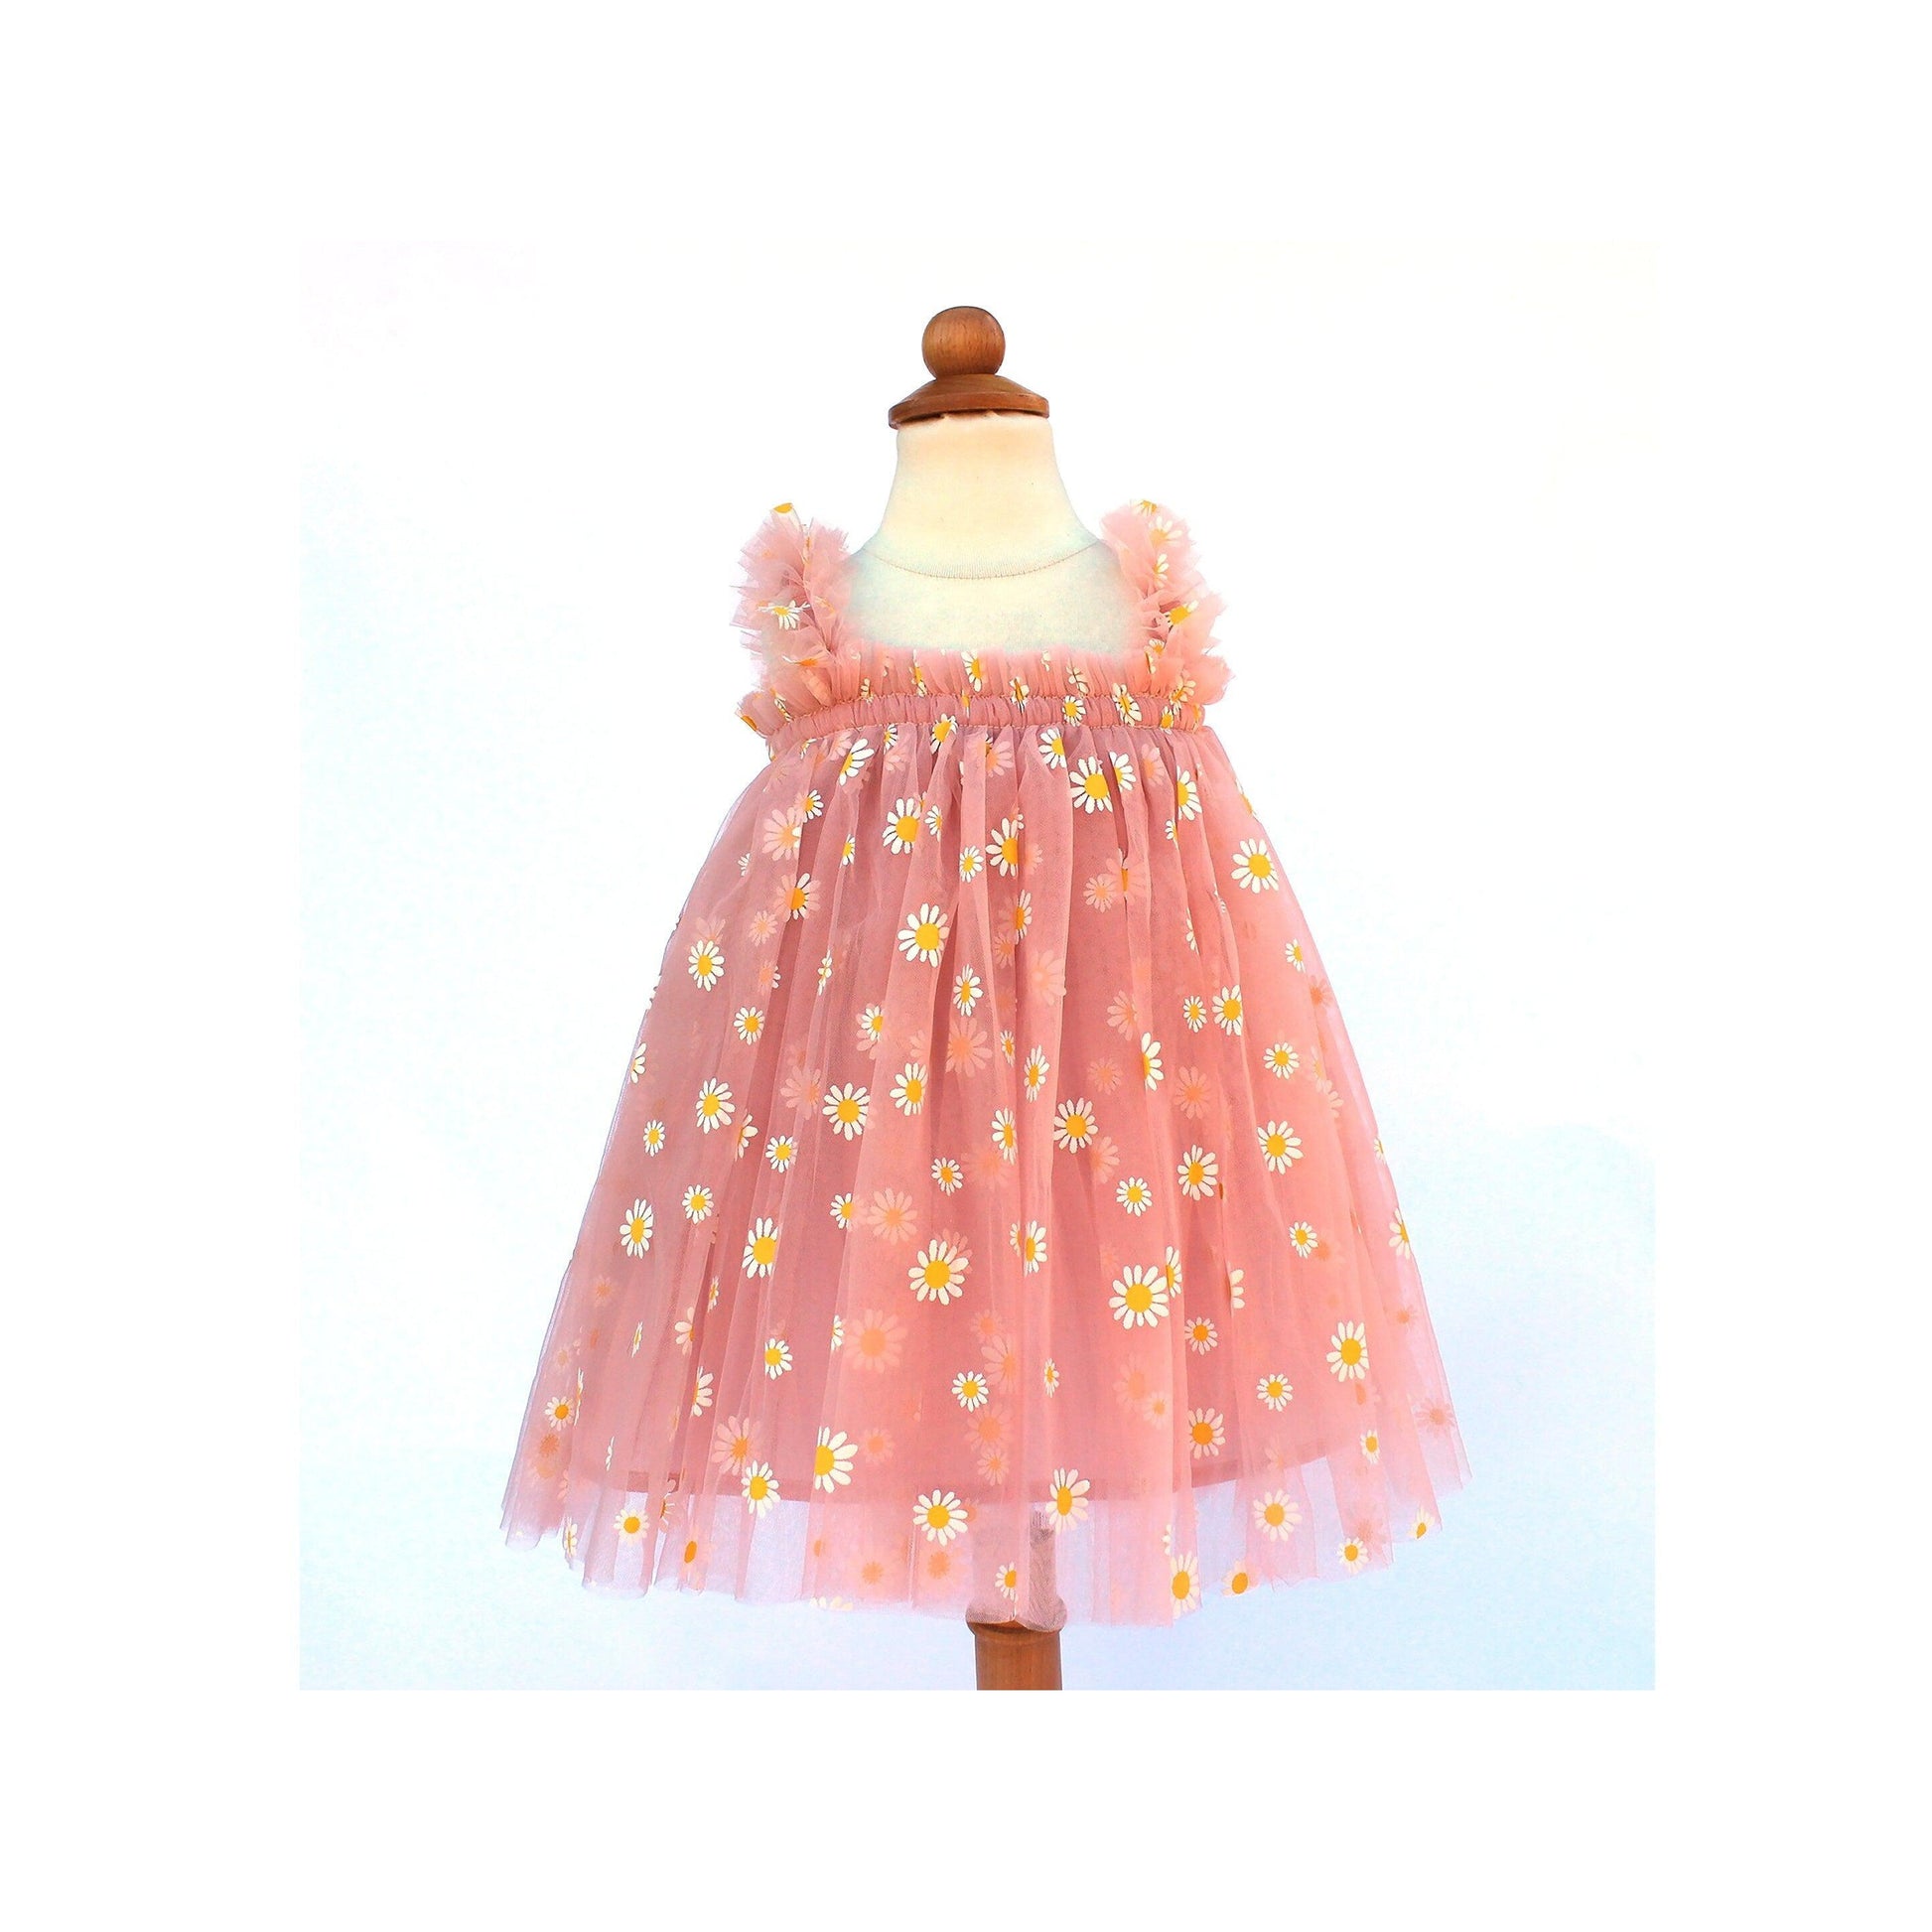 Mauve Tulle Dress | Baby Tulle Dress | Daisy Baby Tutu | Princess Outf